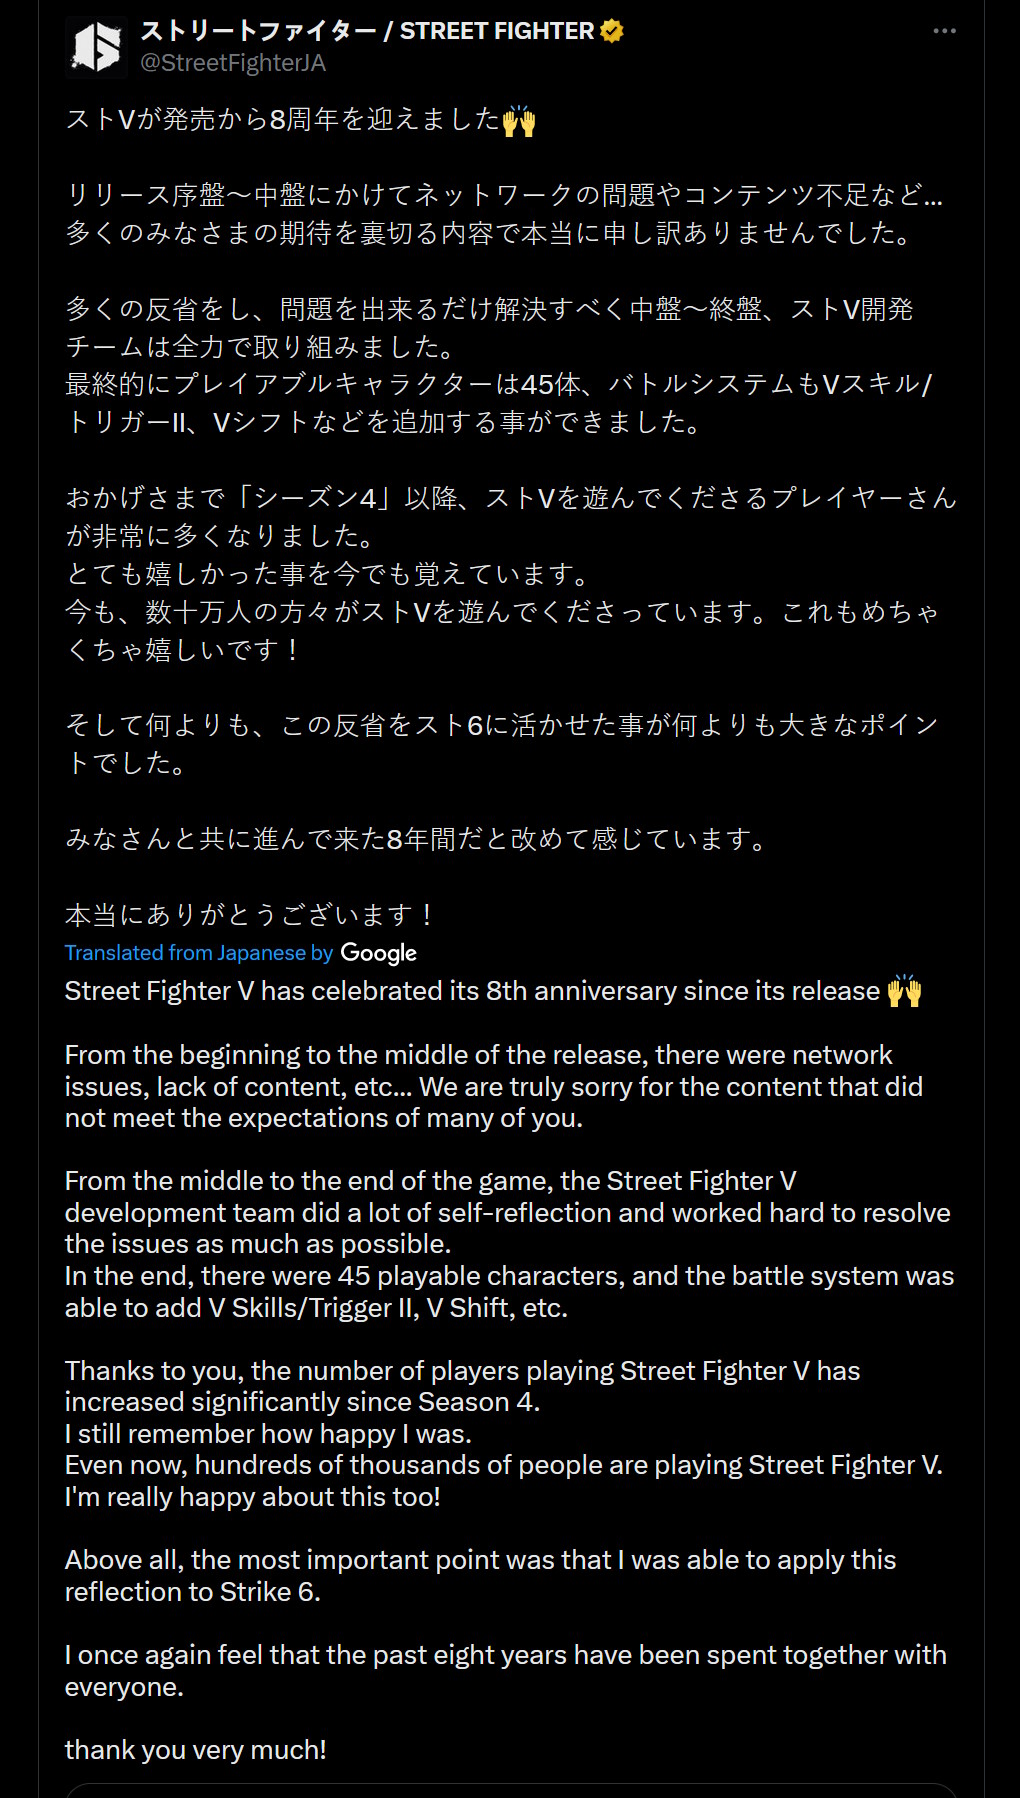 Street Fighter V has celebrated its 8th anniversary since its release ???? From the beginning to the middle of the release, there were network issues, lack of content, etc... We are truly sorry for the content that did not meet the expectations of many of you. From the middle to the end of the game, the Street Fighter V development team did a lot of self-reflection and worked hard to resolve the issues as much as possible. In the end, there were 45 playable characters, and the battle system was able to add V Skills/Trigger II, V Shift, etc. Thanks to you, the number of players playing Street Fighter V has increased significantly since Season 4. I still remember how happy I was. Even now, hundreds of thousands of people are playing Street Fighter V. I'm really happy about this too! Above all, the most important point was that I was able to apply this reflection to Strike 6. I once again feel that the past eight years have been spent together with everyone. thank you very much!